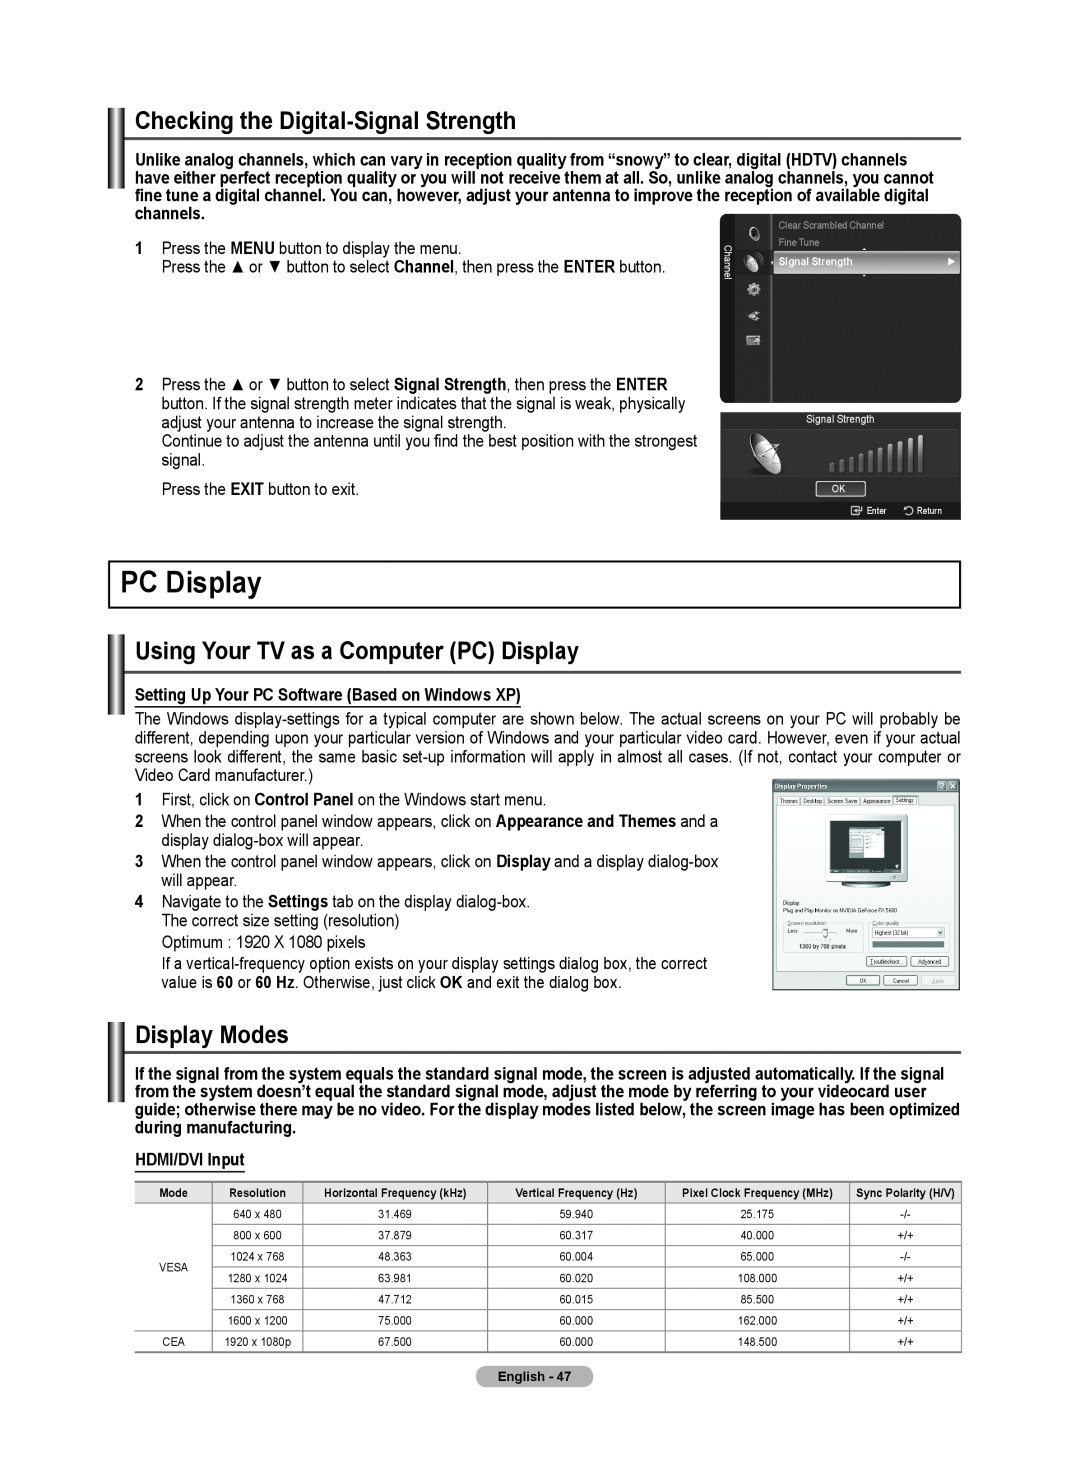 Samsung 510 user manual Checking the Digital-Signal Strength, Using Your TV as a Computer PC Display, Display Modes 